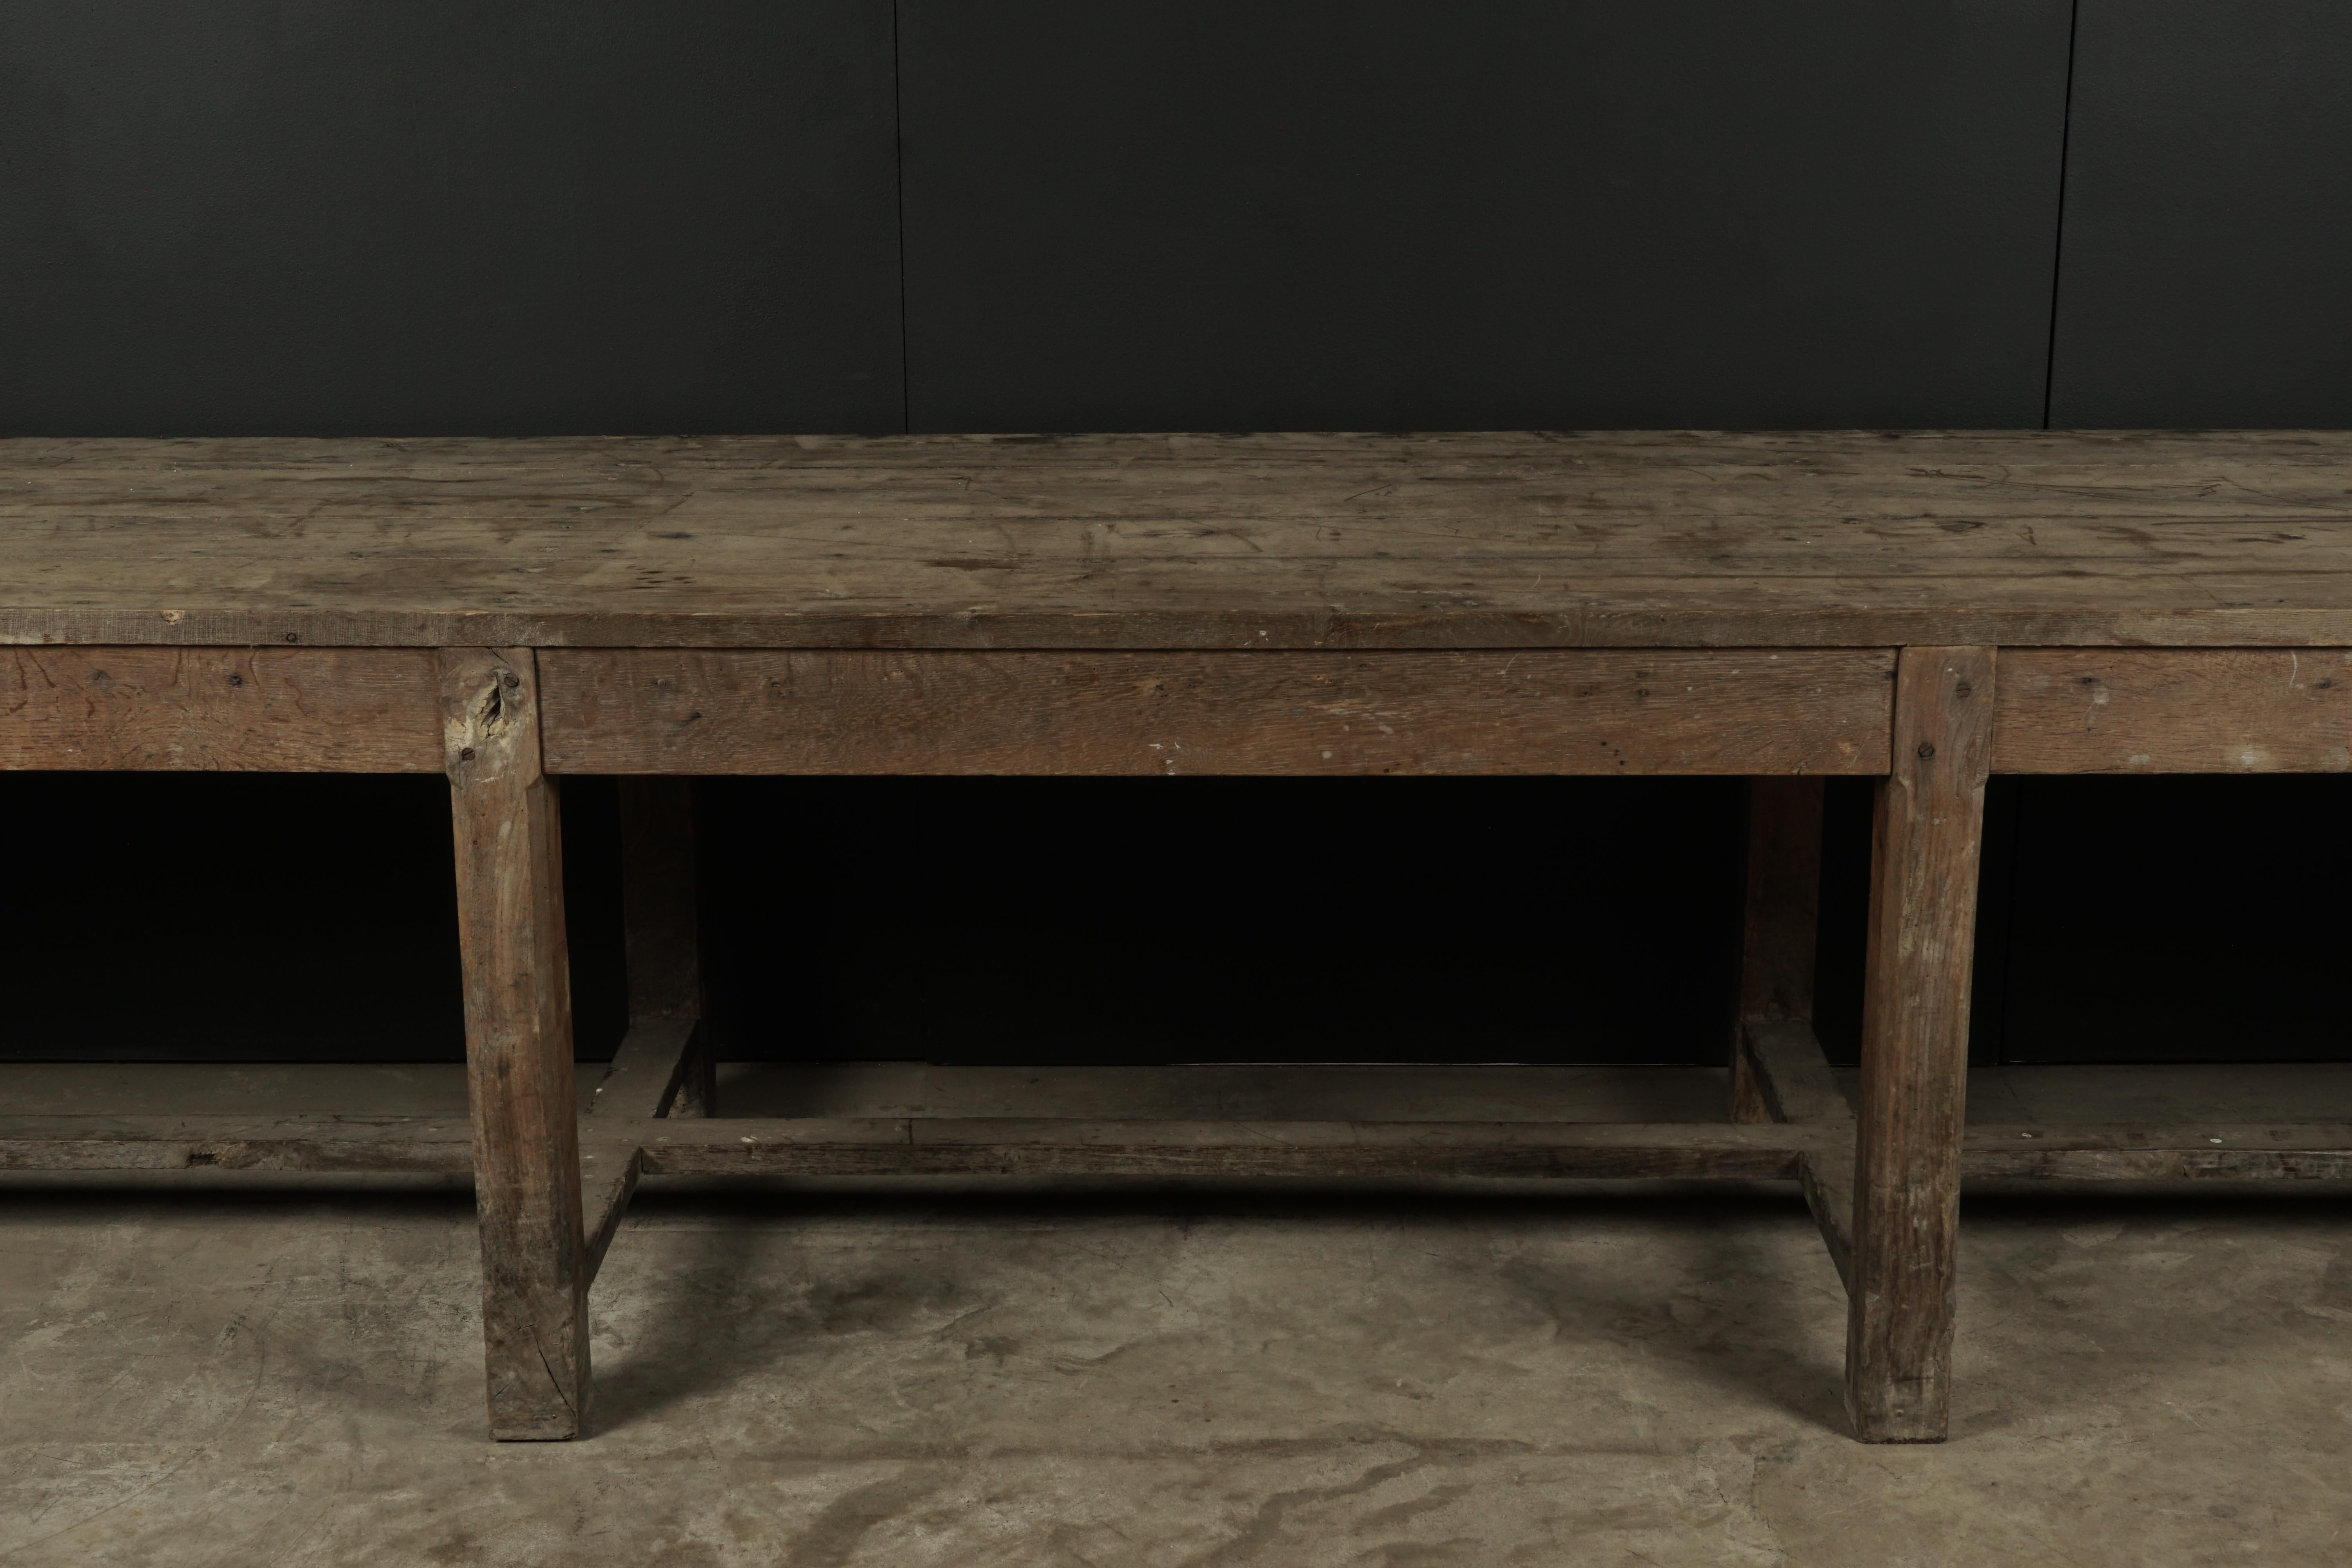 Rare very large solid oak dining table from France, circa 1920. Heavy oak construction with very nice feeling and patina. Unusual size, most likely from a convent.